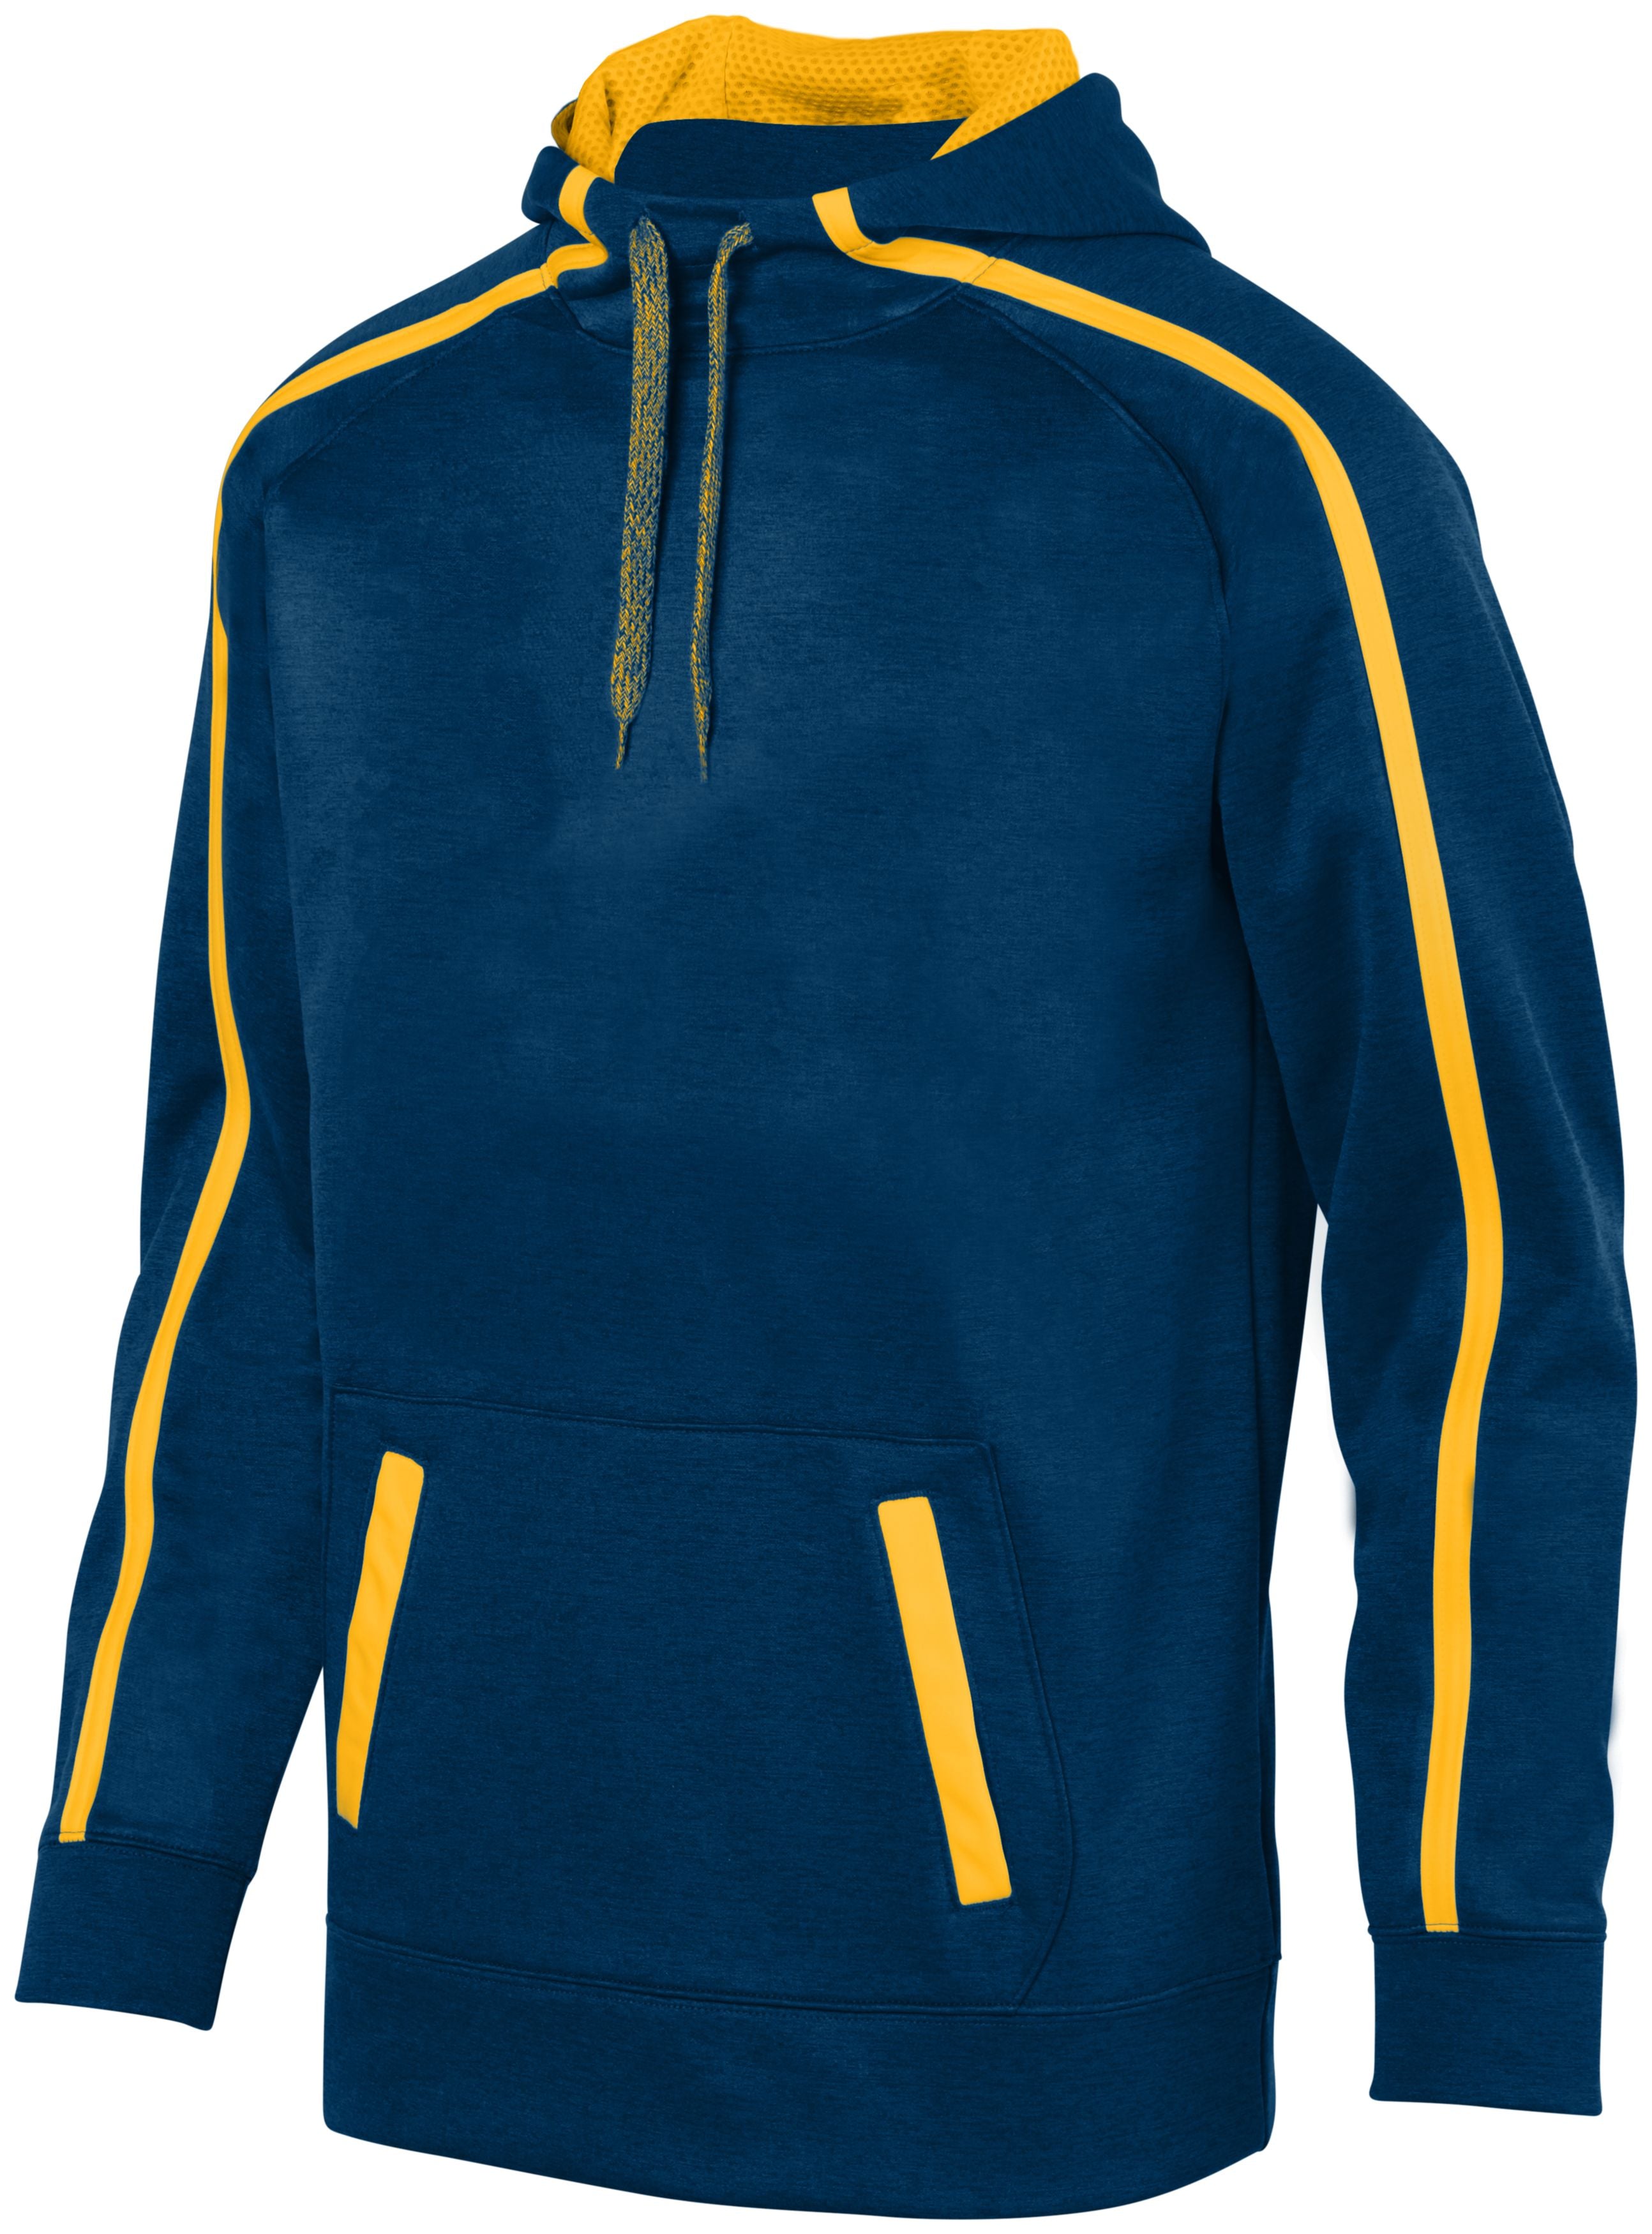 Augusta Sportswear Youth Stoked Tonal Heather Hoodie in Navy/Gold  -Part of the Youth, Augusta-Products, Shirts, Tonal-Fleece-Collection product lines at KanaleyCreations.com